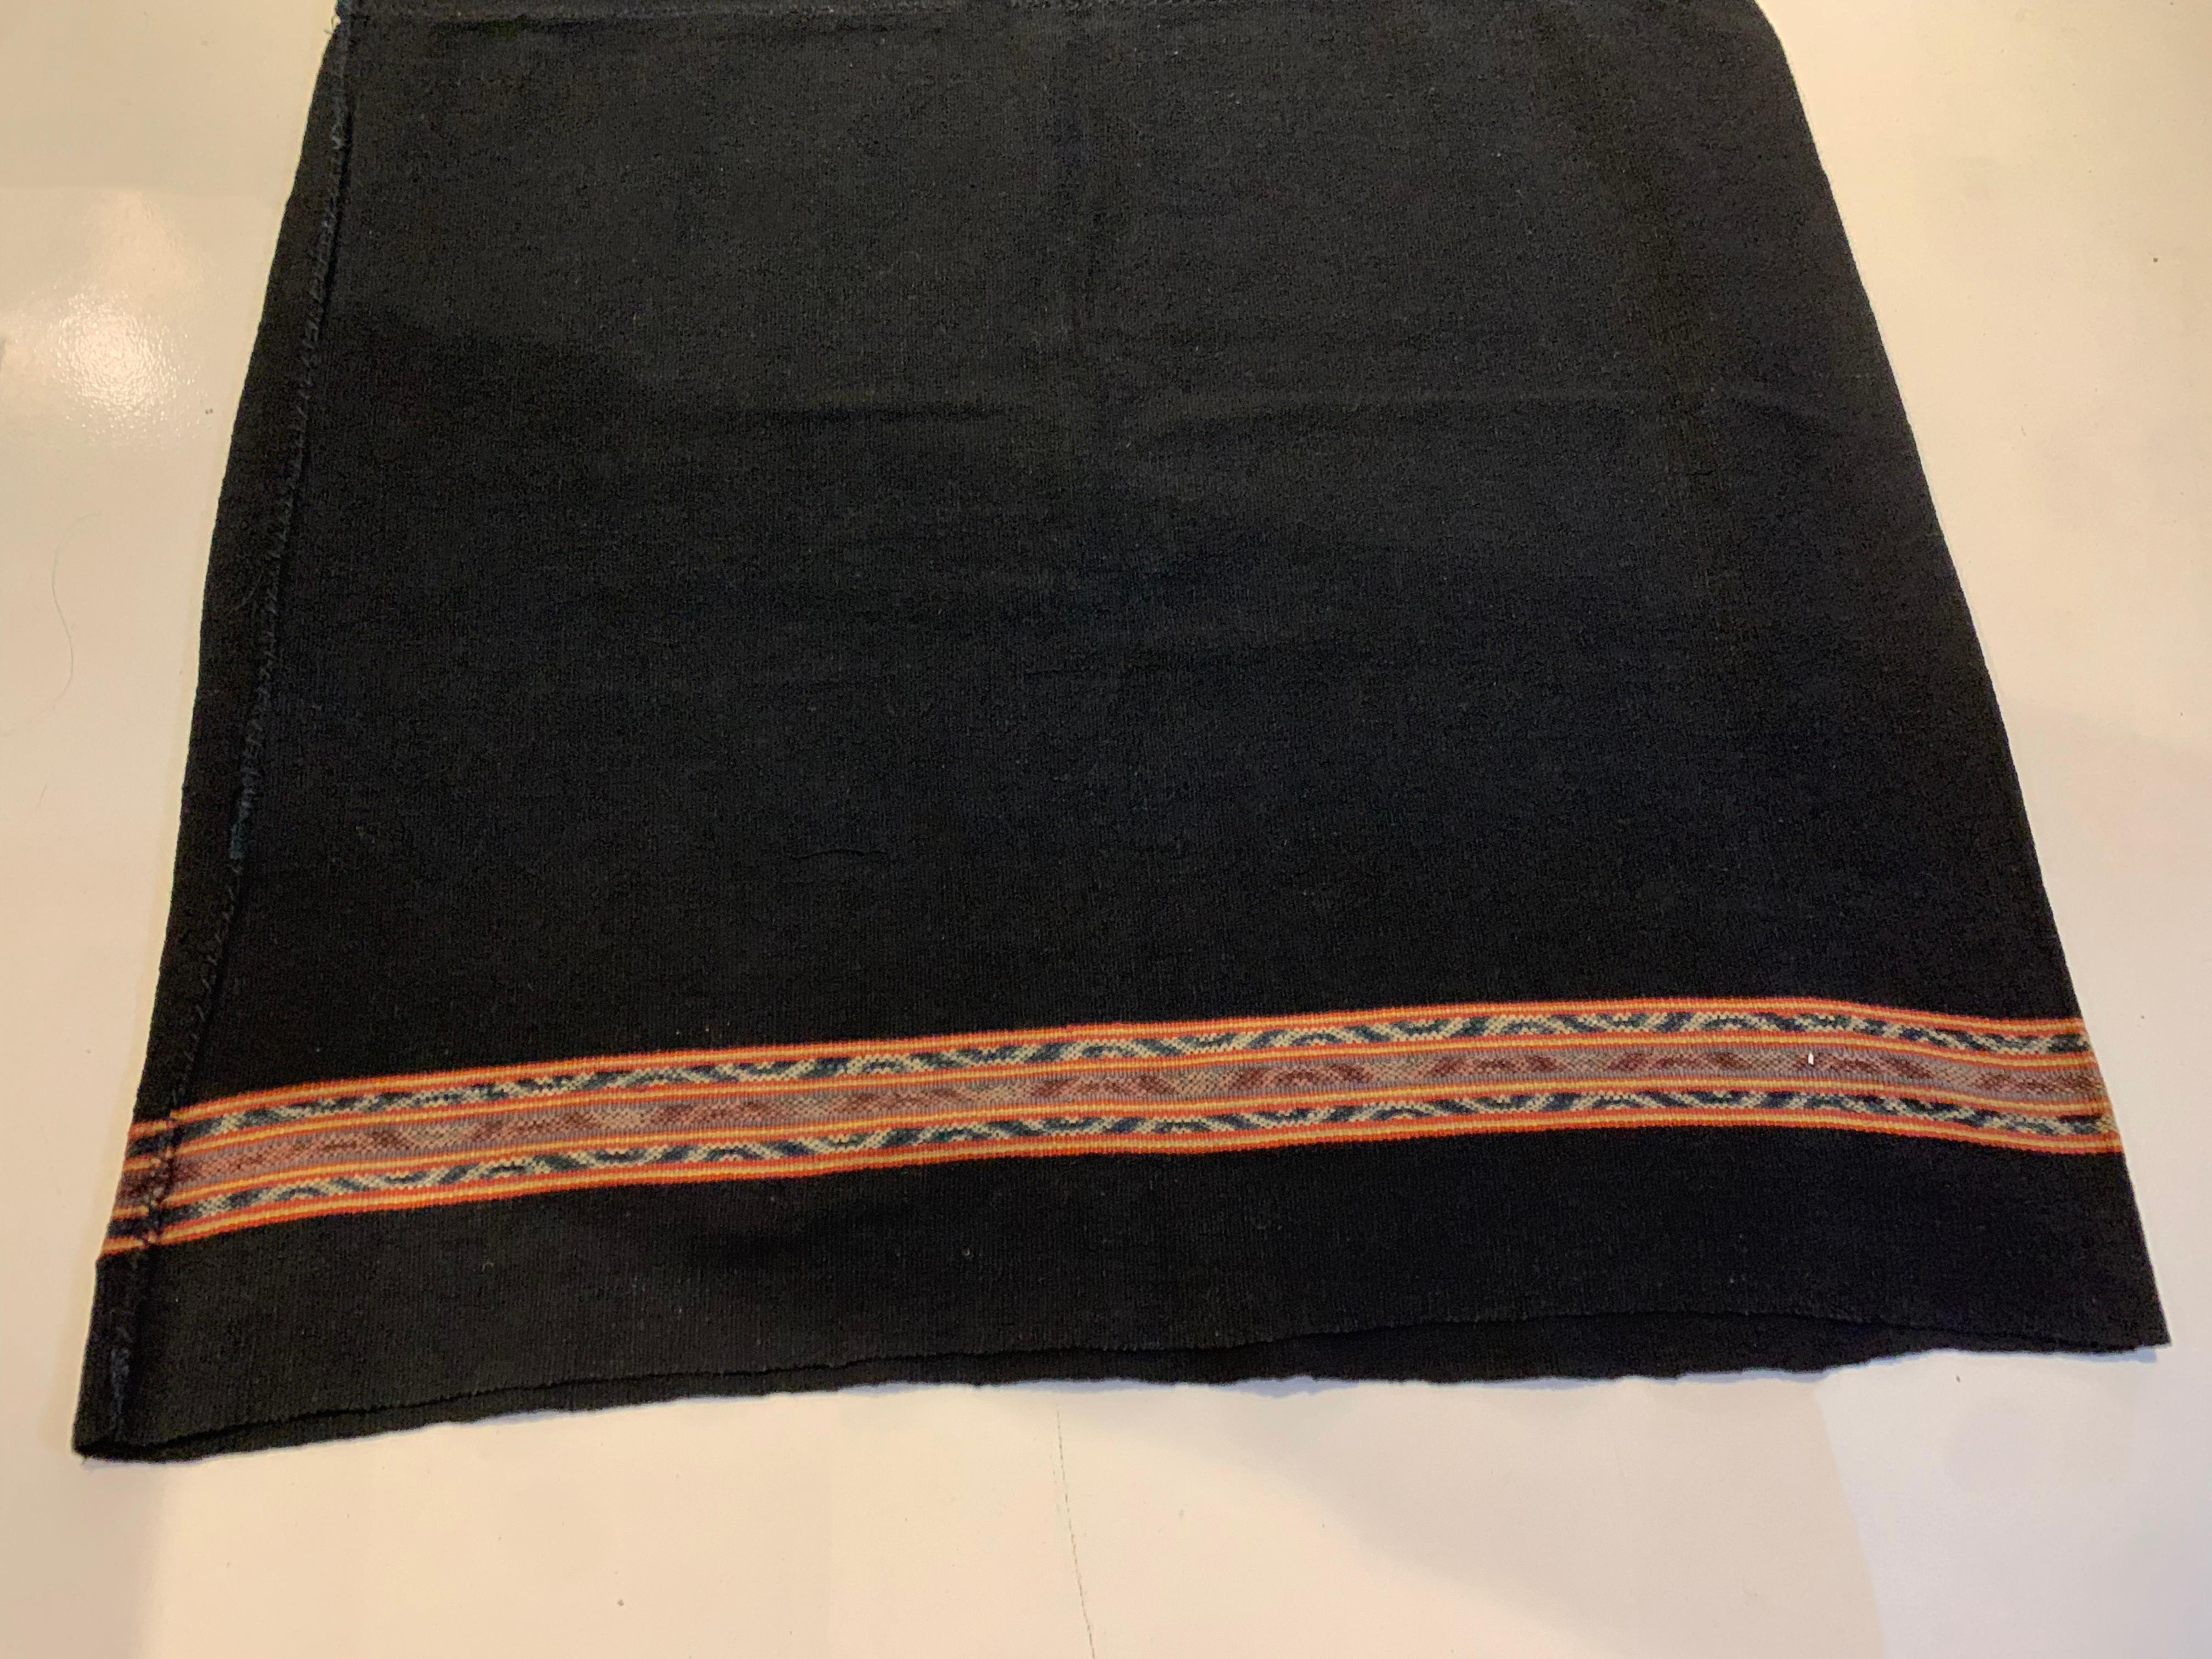 Ikat Textile from Timor Island with Stunning Naturally Coloured Dye, Indonesia In Good Condition For Sale In Jimbaran, Bali